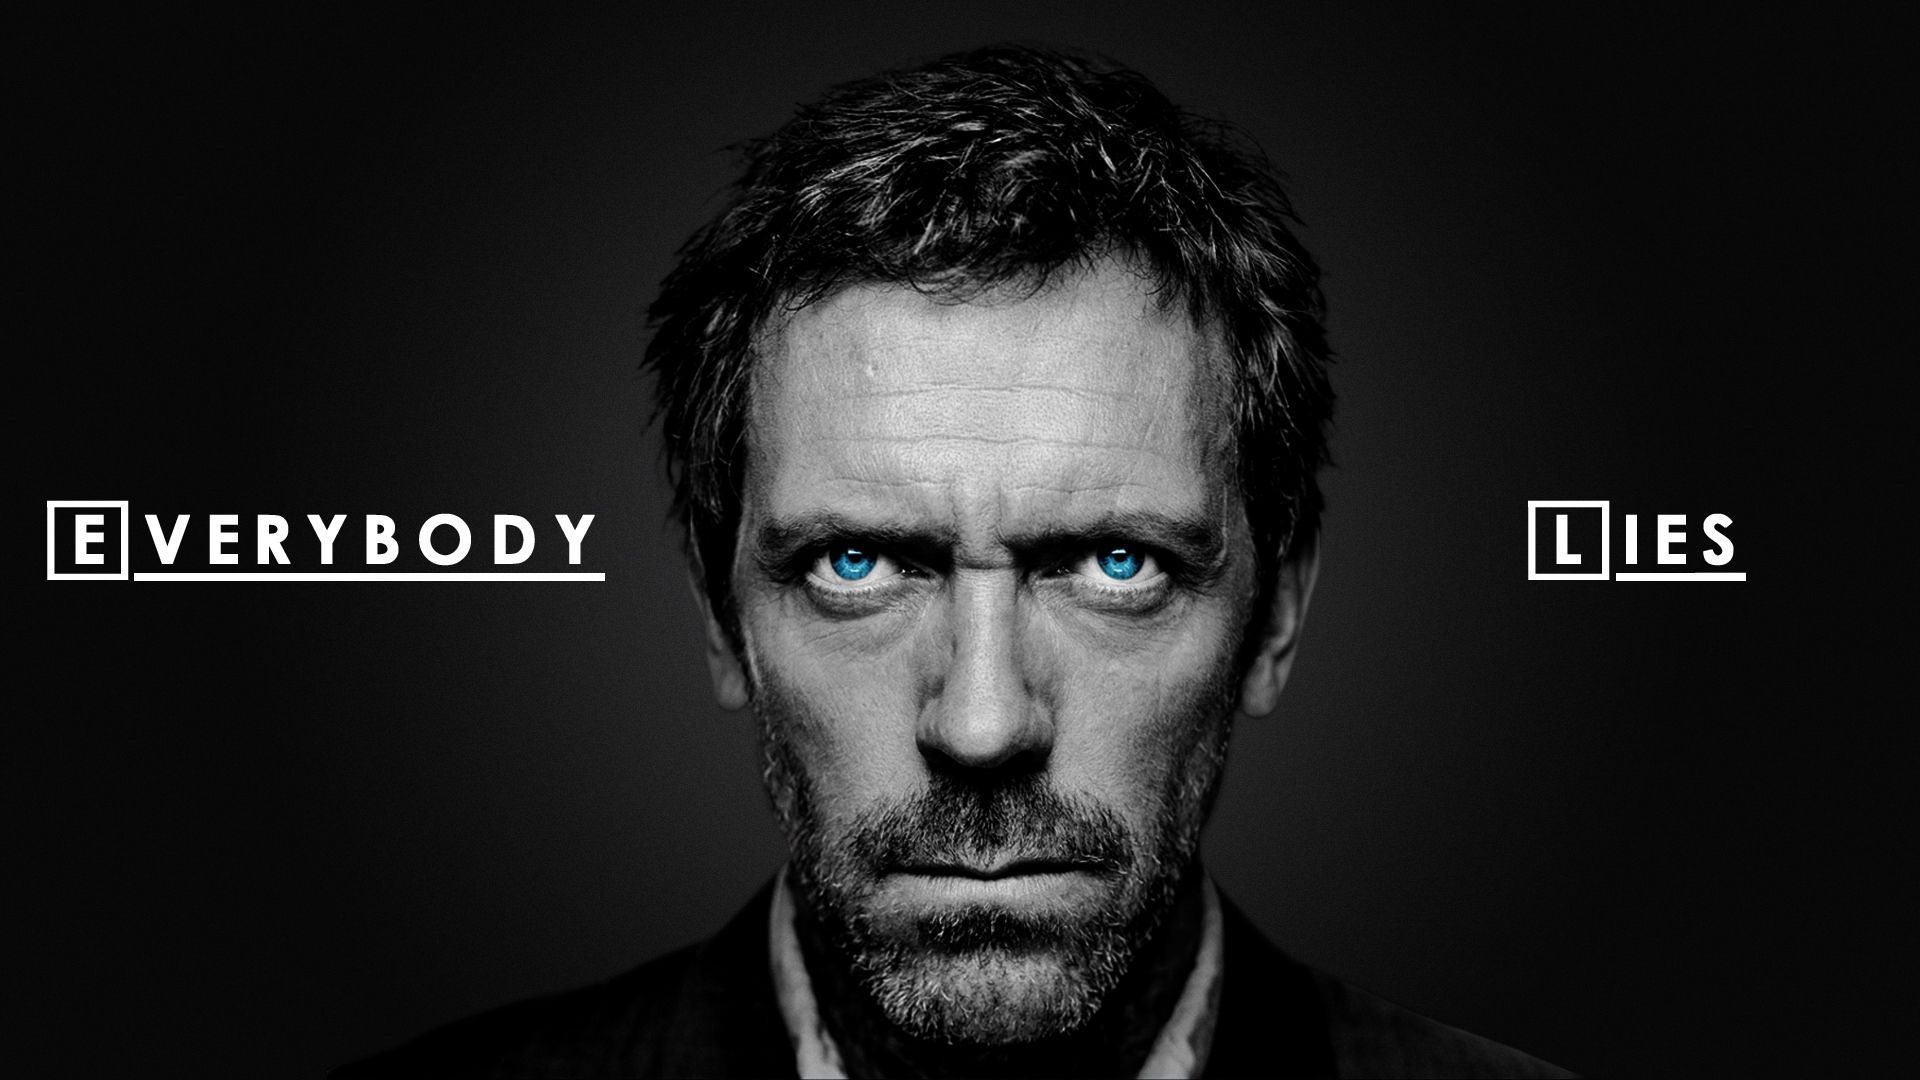 Everybody Lies Dr.House Wallpaper Download. House md, Everybody lies, Dr house